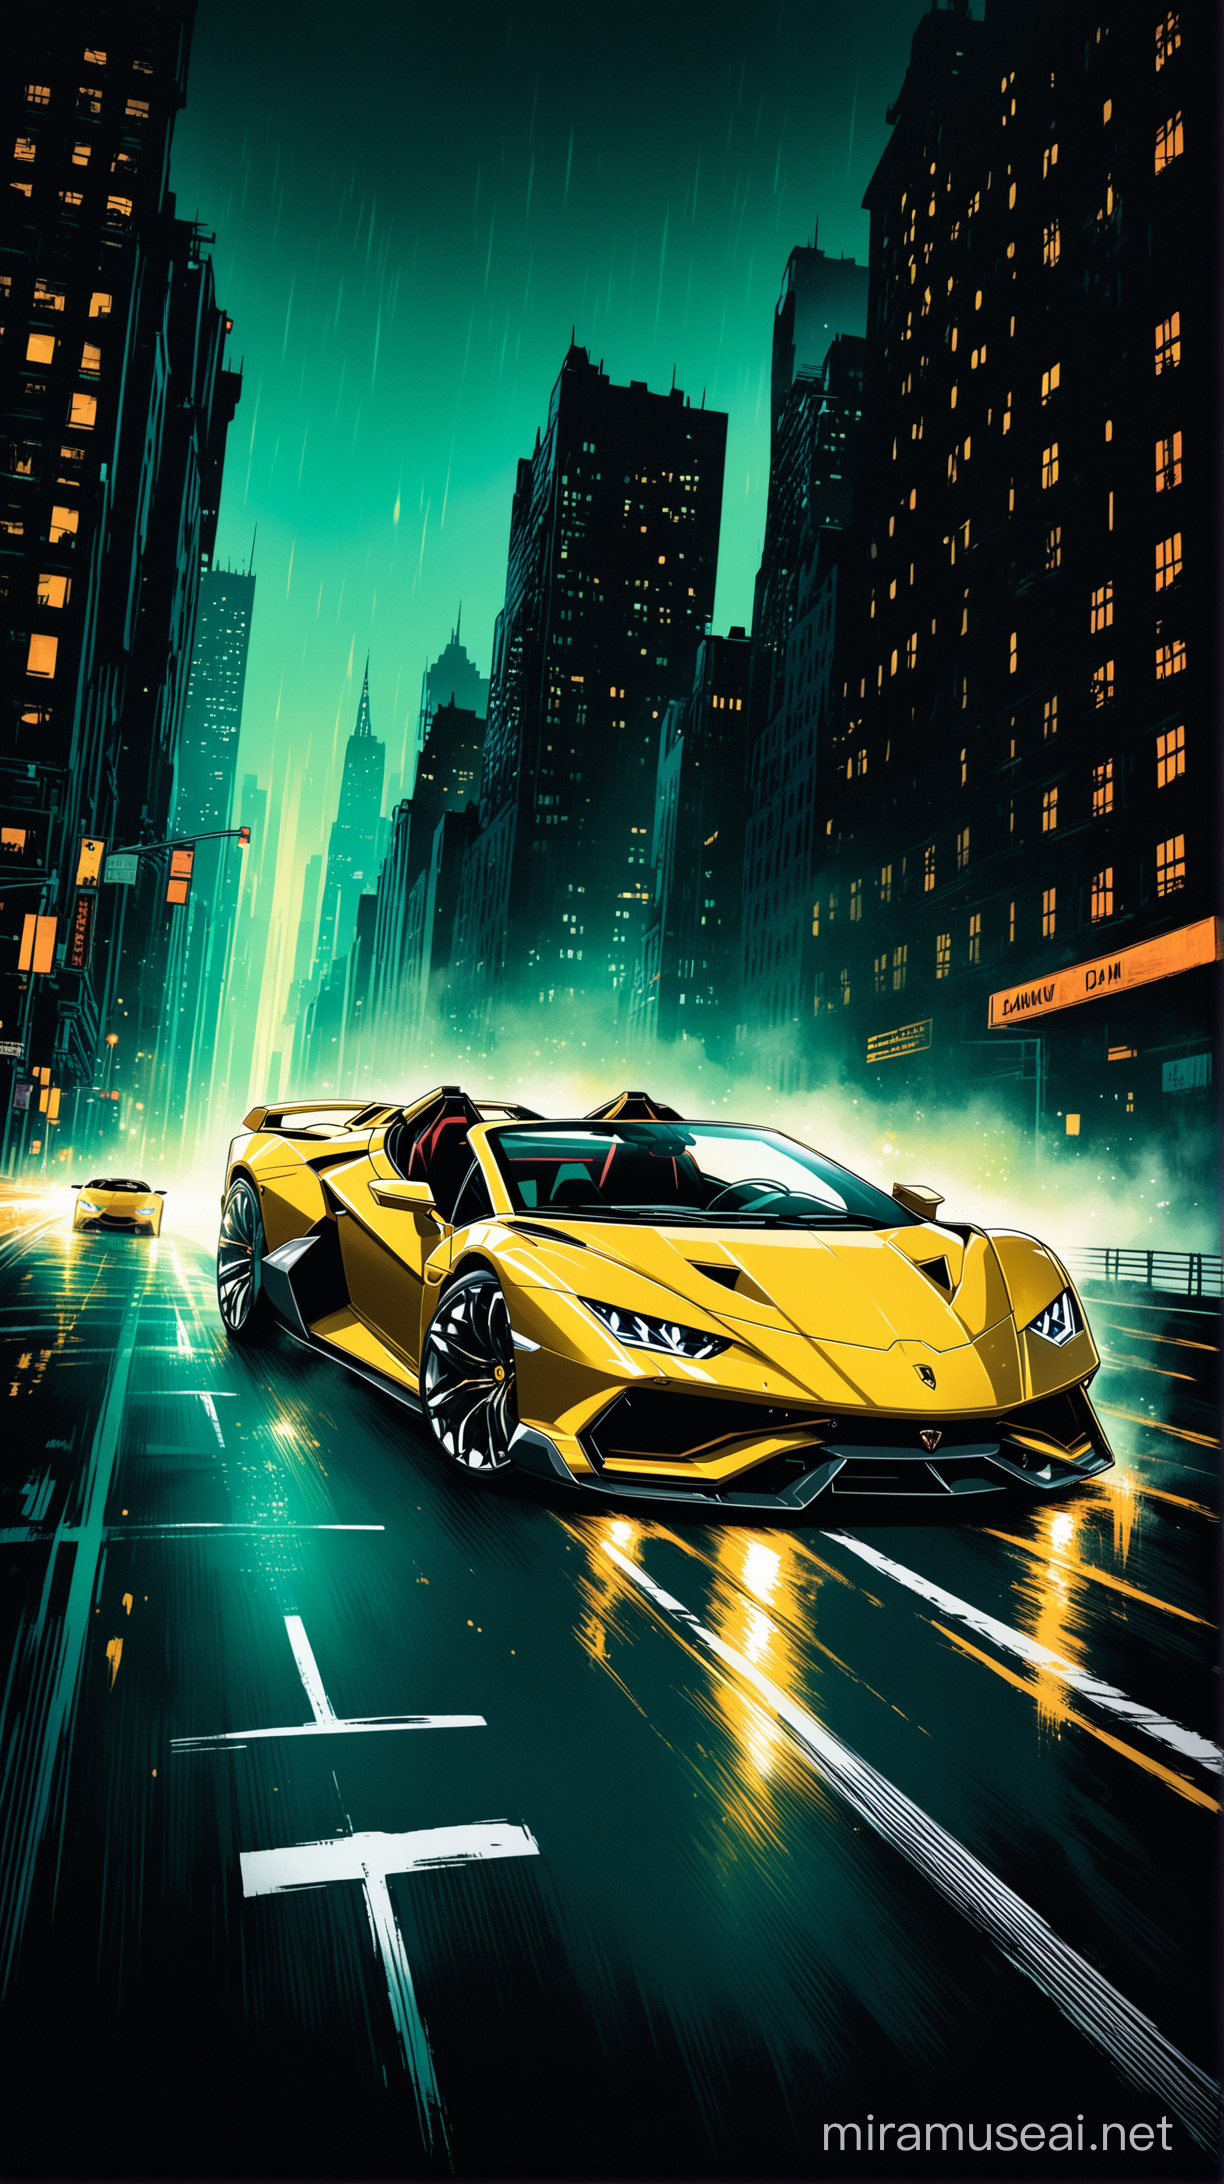 A high contrast poster showing an exciting yellow Lamborghini sian roadster with red lines, coming out of a corner at high speed with a sense of danger.  The car has stickers on its doors that say "Amaury."  The background is dimly lit New York City, with bridges and buildings in the distance.  The illustration captures the intense atmosphere of the moment, full of cinematic lighting, illustration, poster, dark fantasy, painting and high contrast